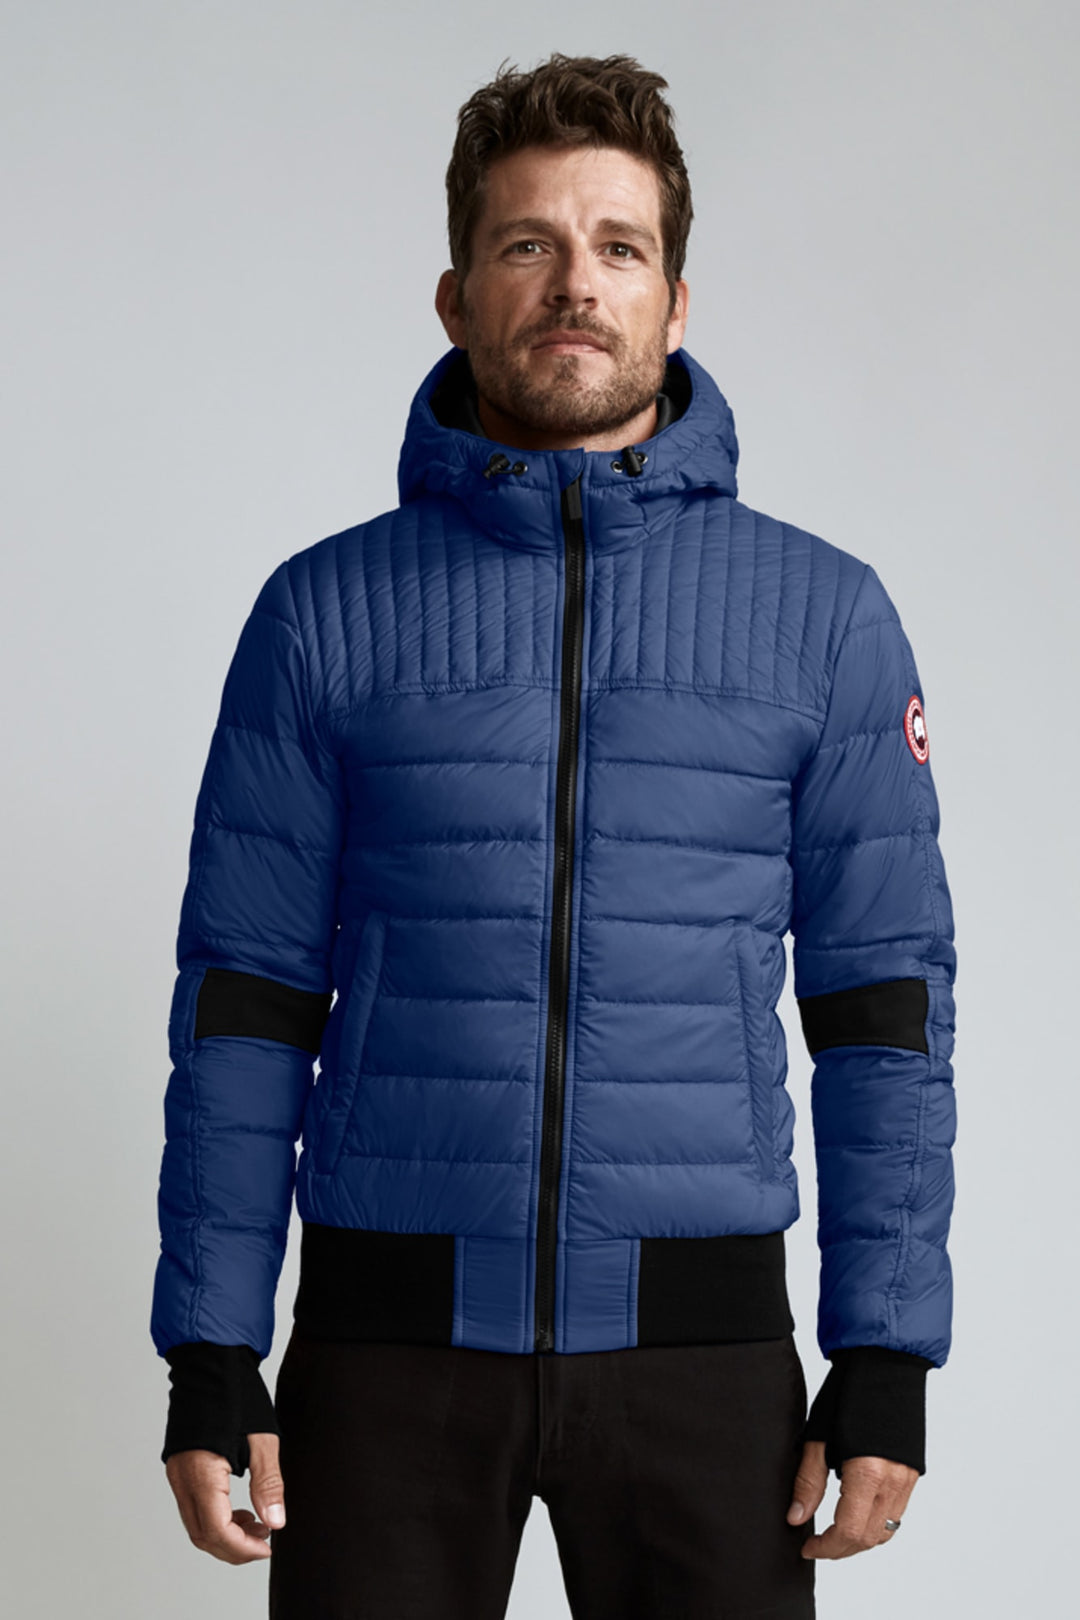 I'm Stocking Up on Nike's Double-Discounted Puffer Jackets